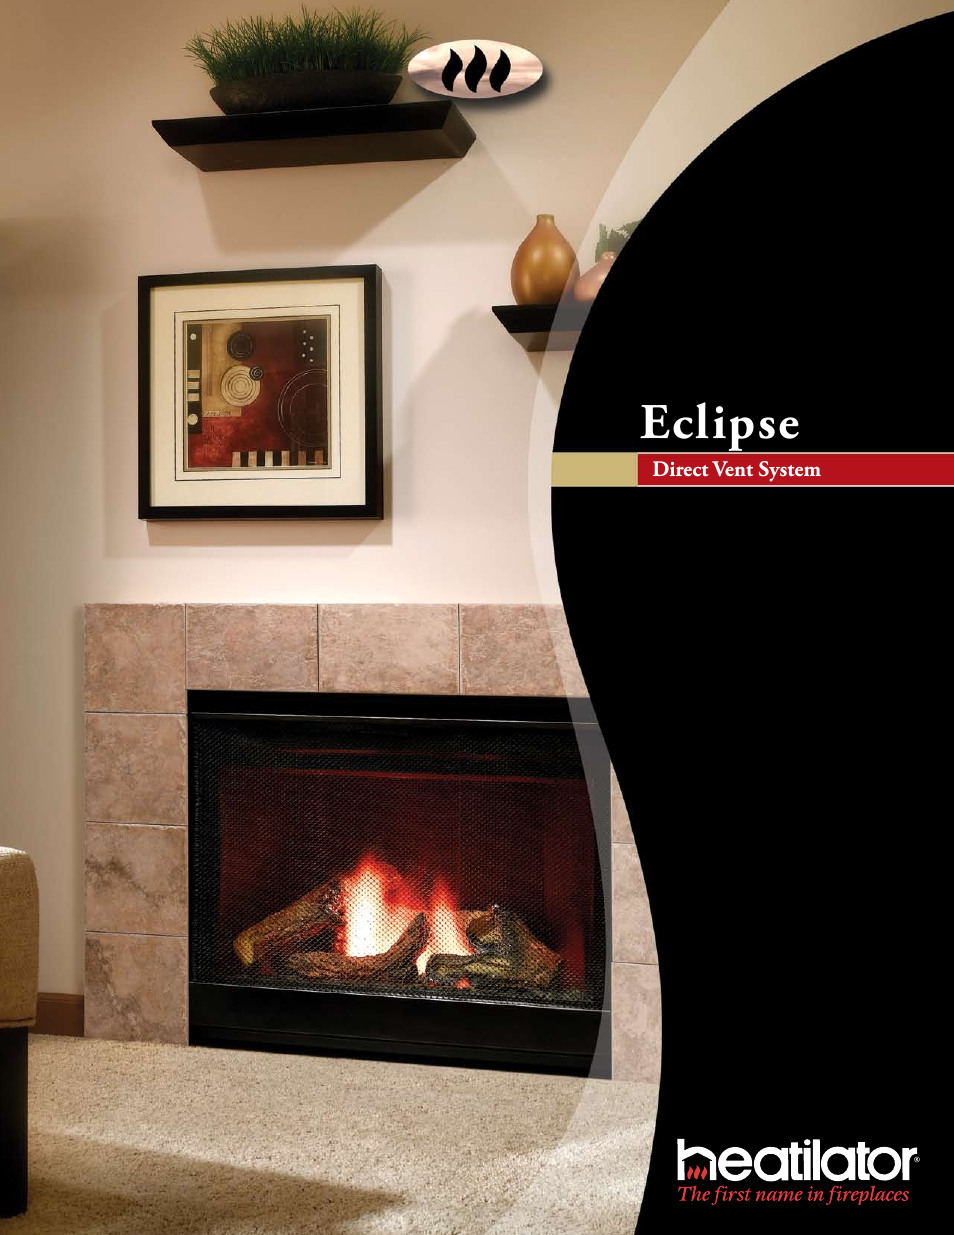 Direct Vent System Eclipse